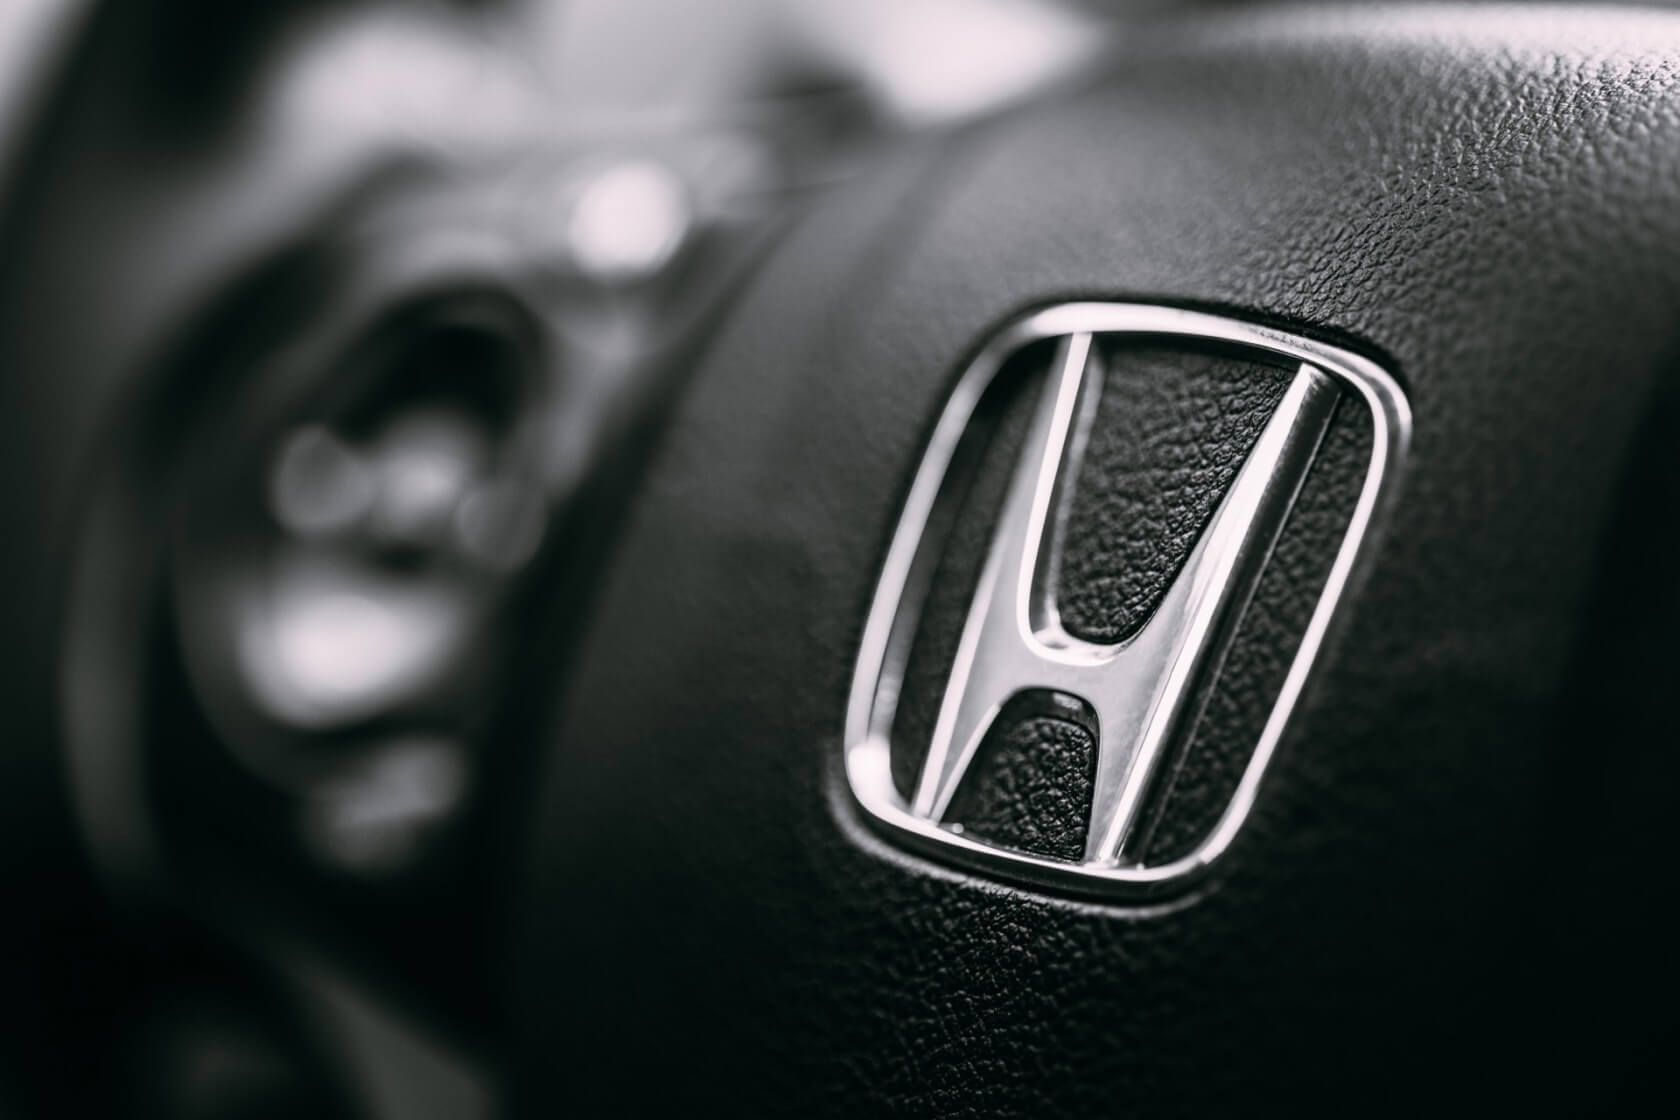 Honda's worldwide operations have reportedly been hindered by a cyber attack